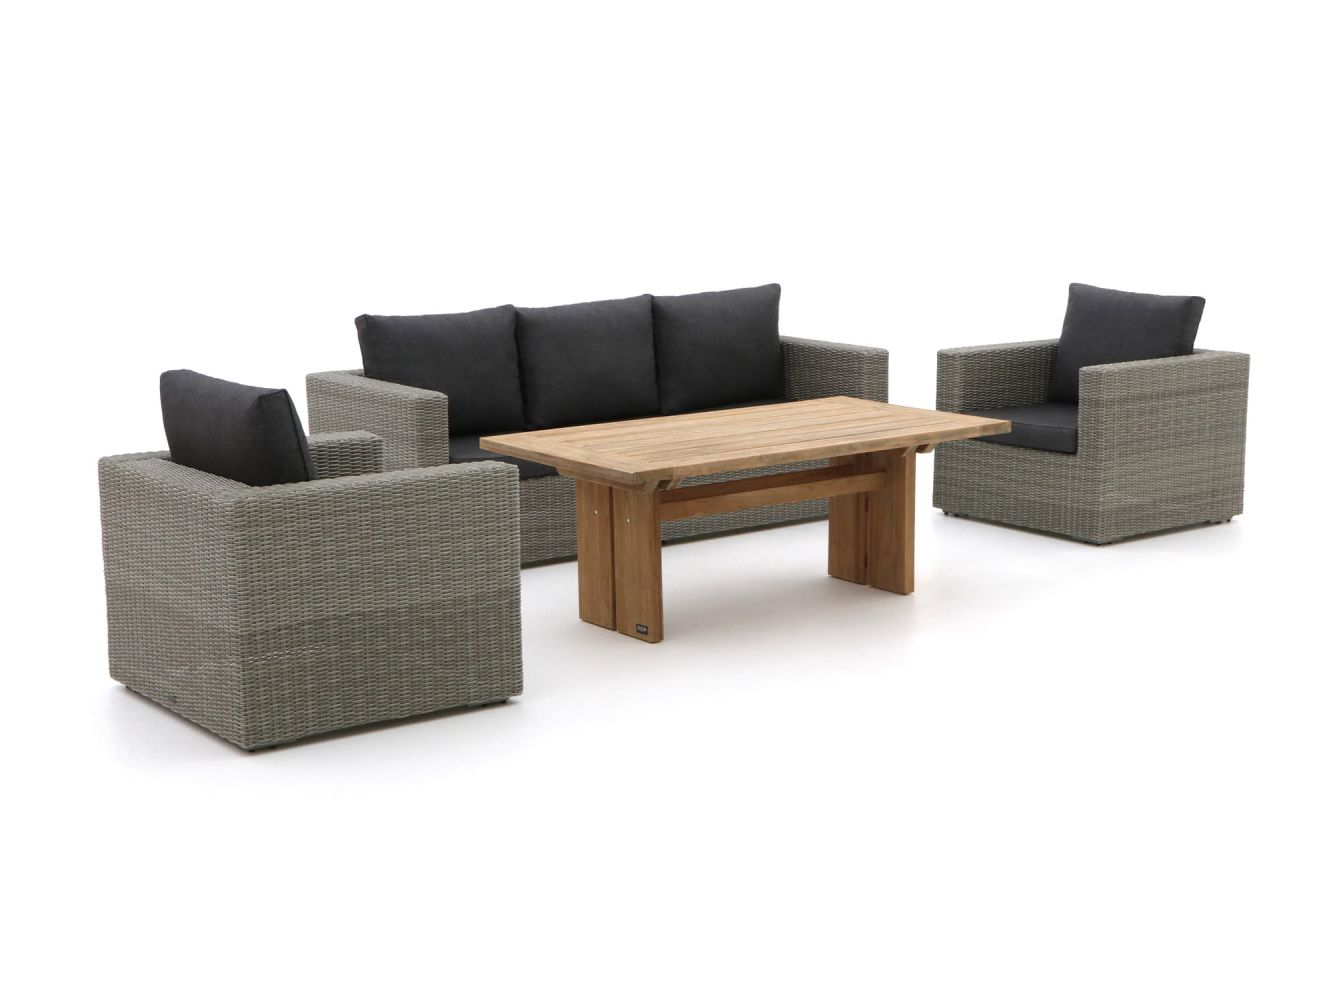 ef47734ae47f49d4569f5fcfa7a50d150b41d9c5 118125 p01 yiiswlcihrsdbsyu - Intenso Carpino/ROUGH-L dining loungeset 4-delig